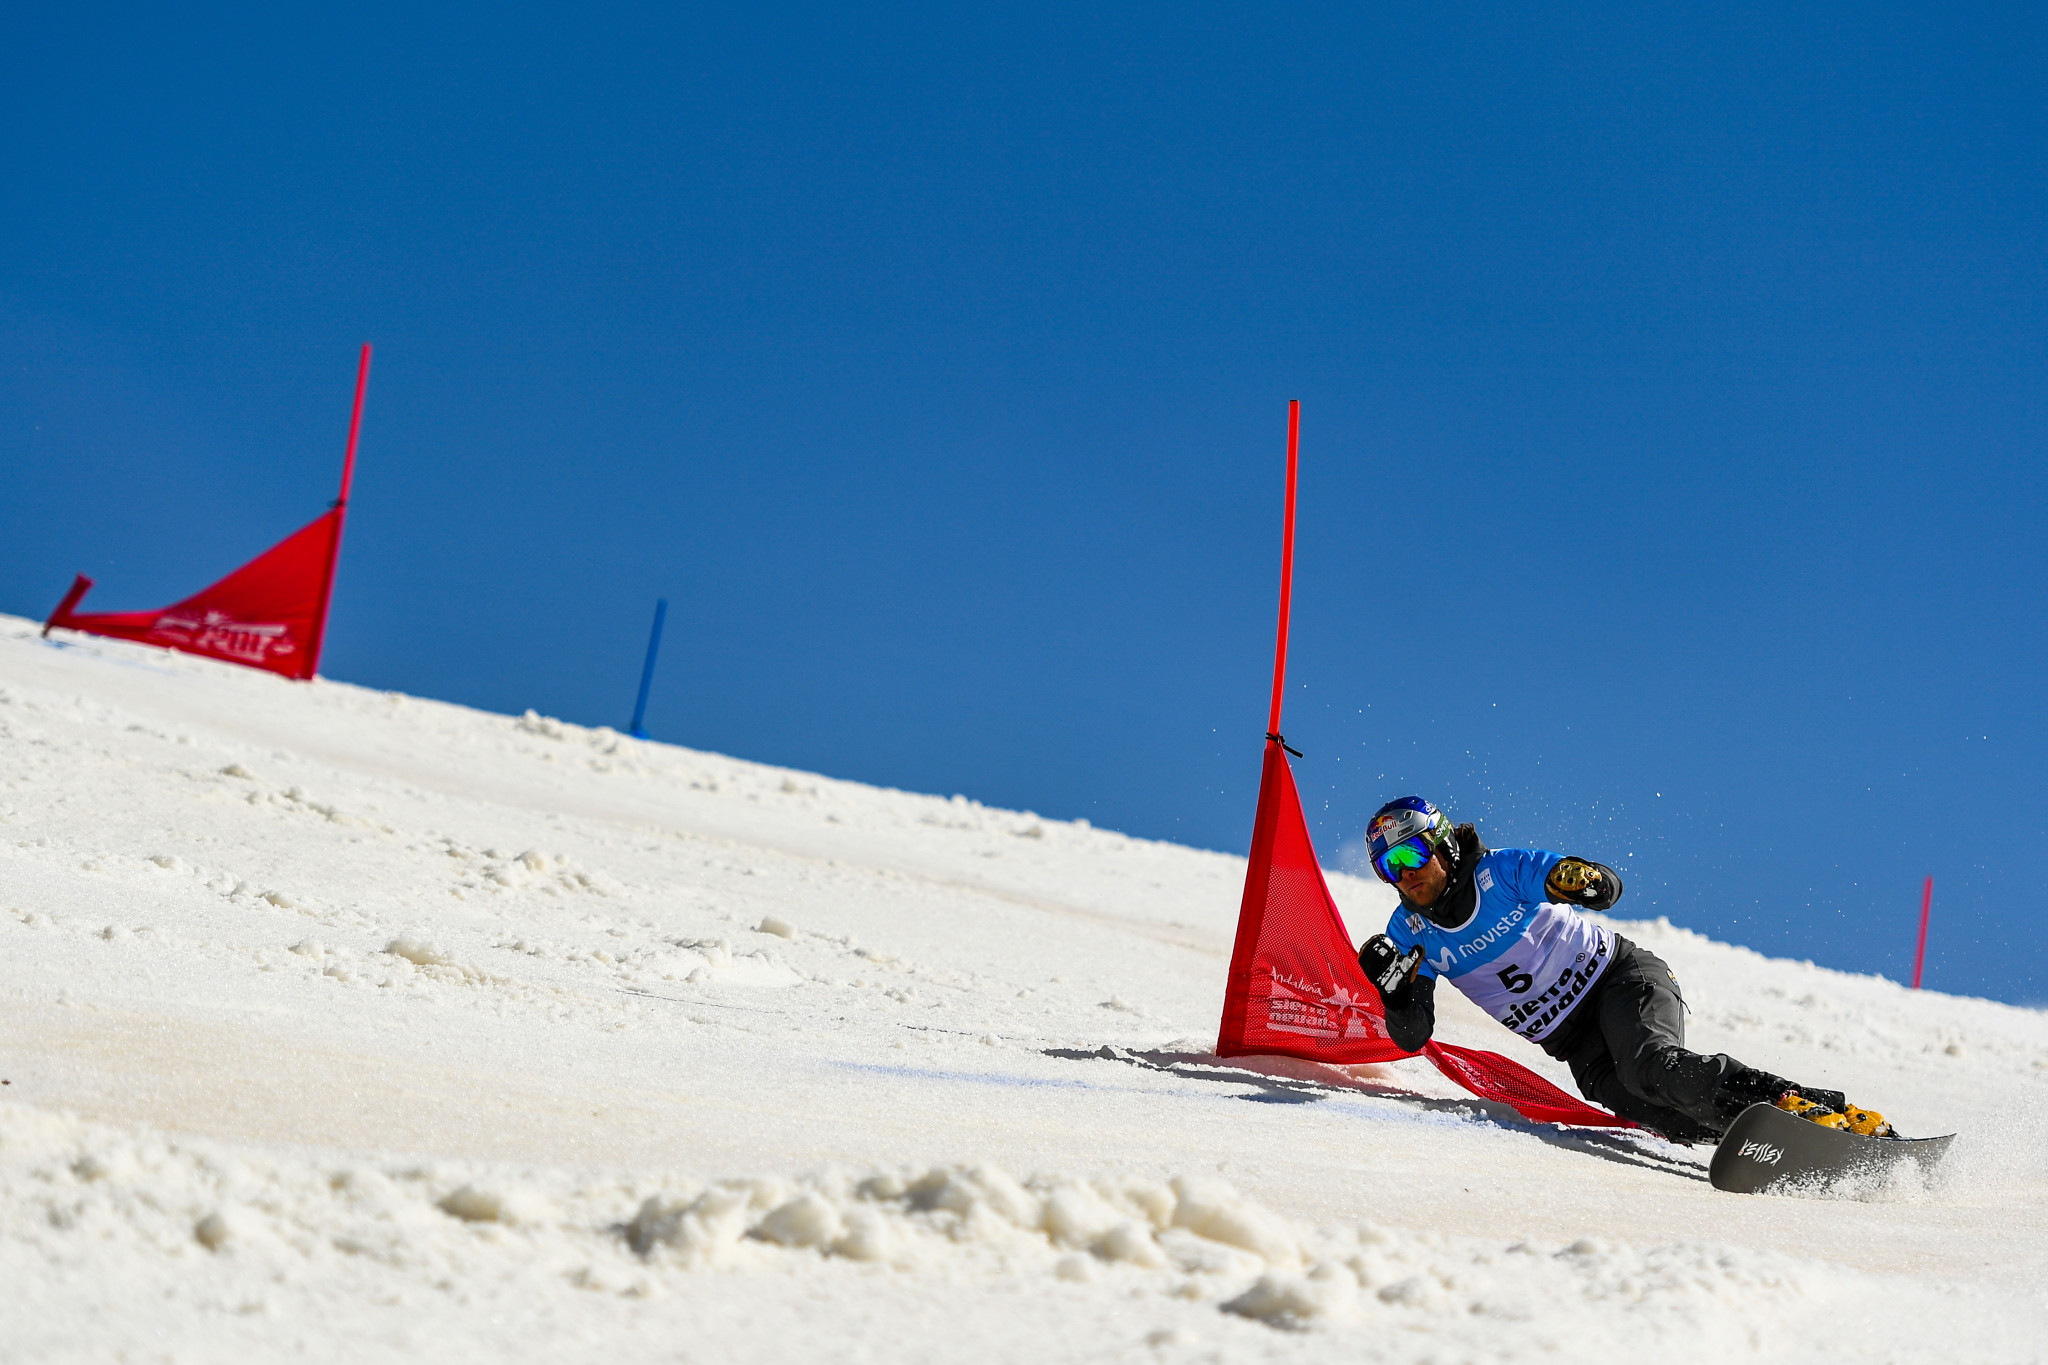 Bad Gastein to host first parallel slalom event of Snowboard World Cup season